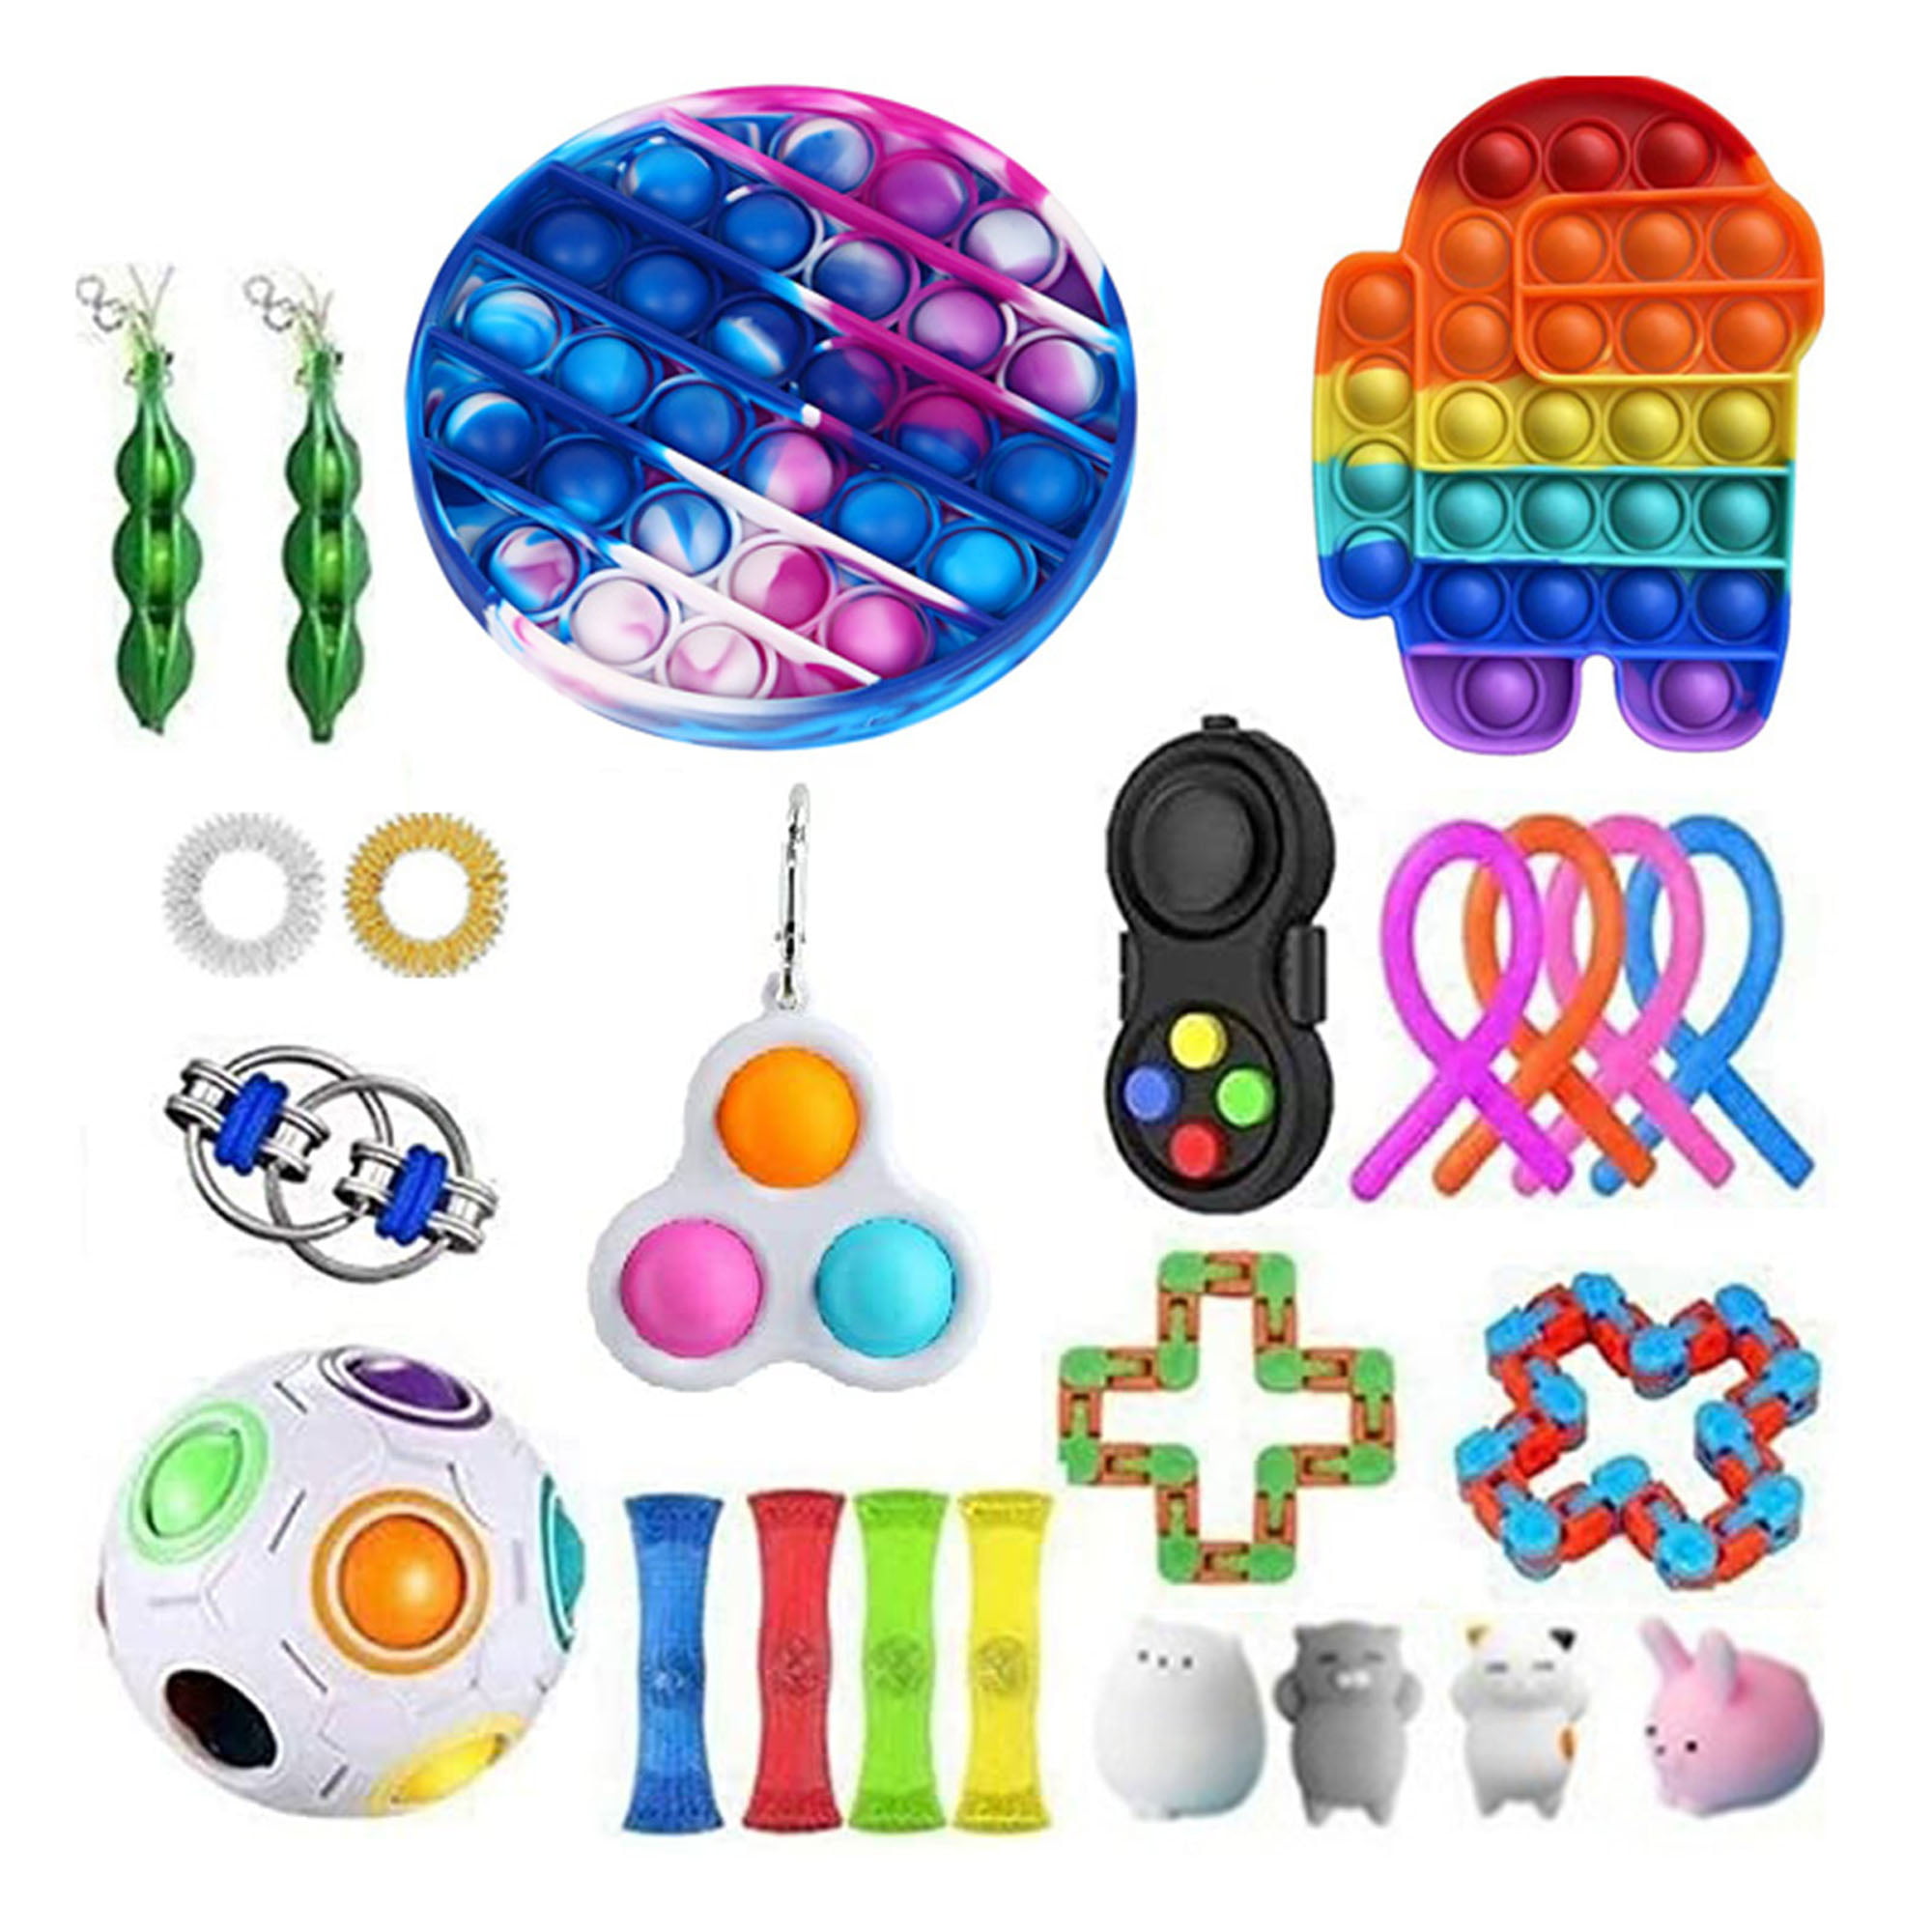 Details about   Fidget Sensory Toys Set 50 Pack For Stress Relief Anti-Anxiety Stocking Hot